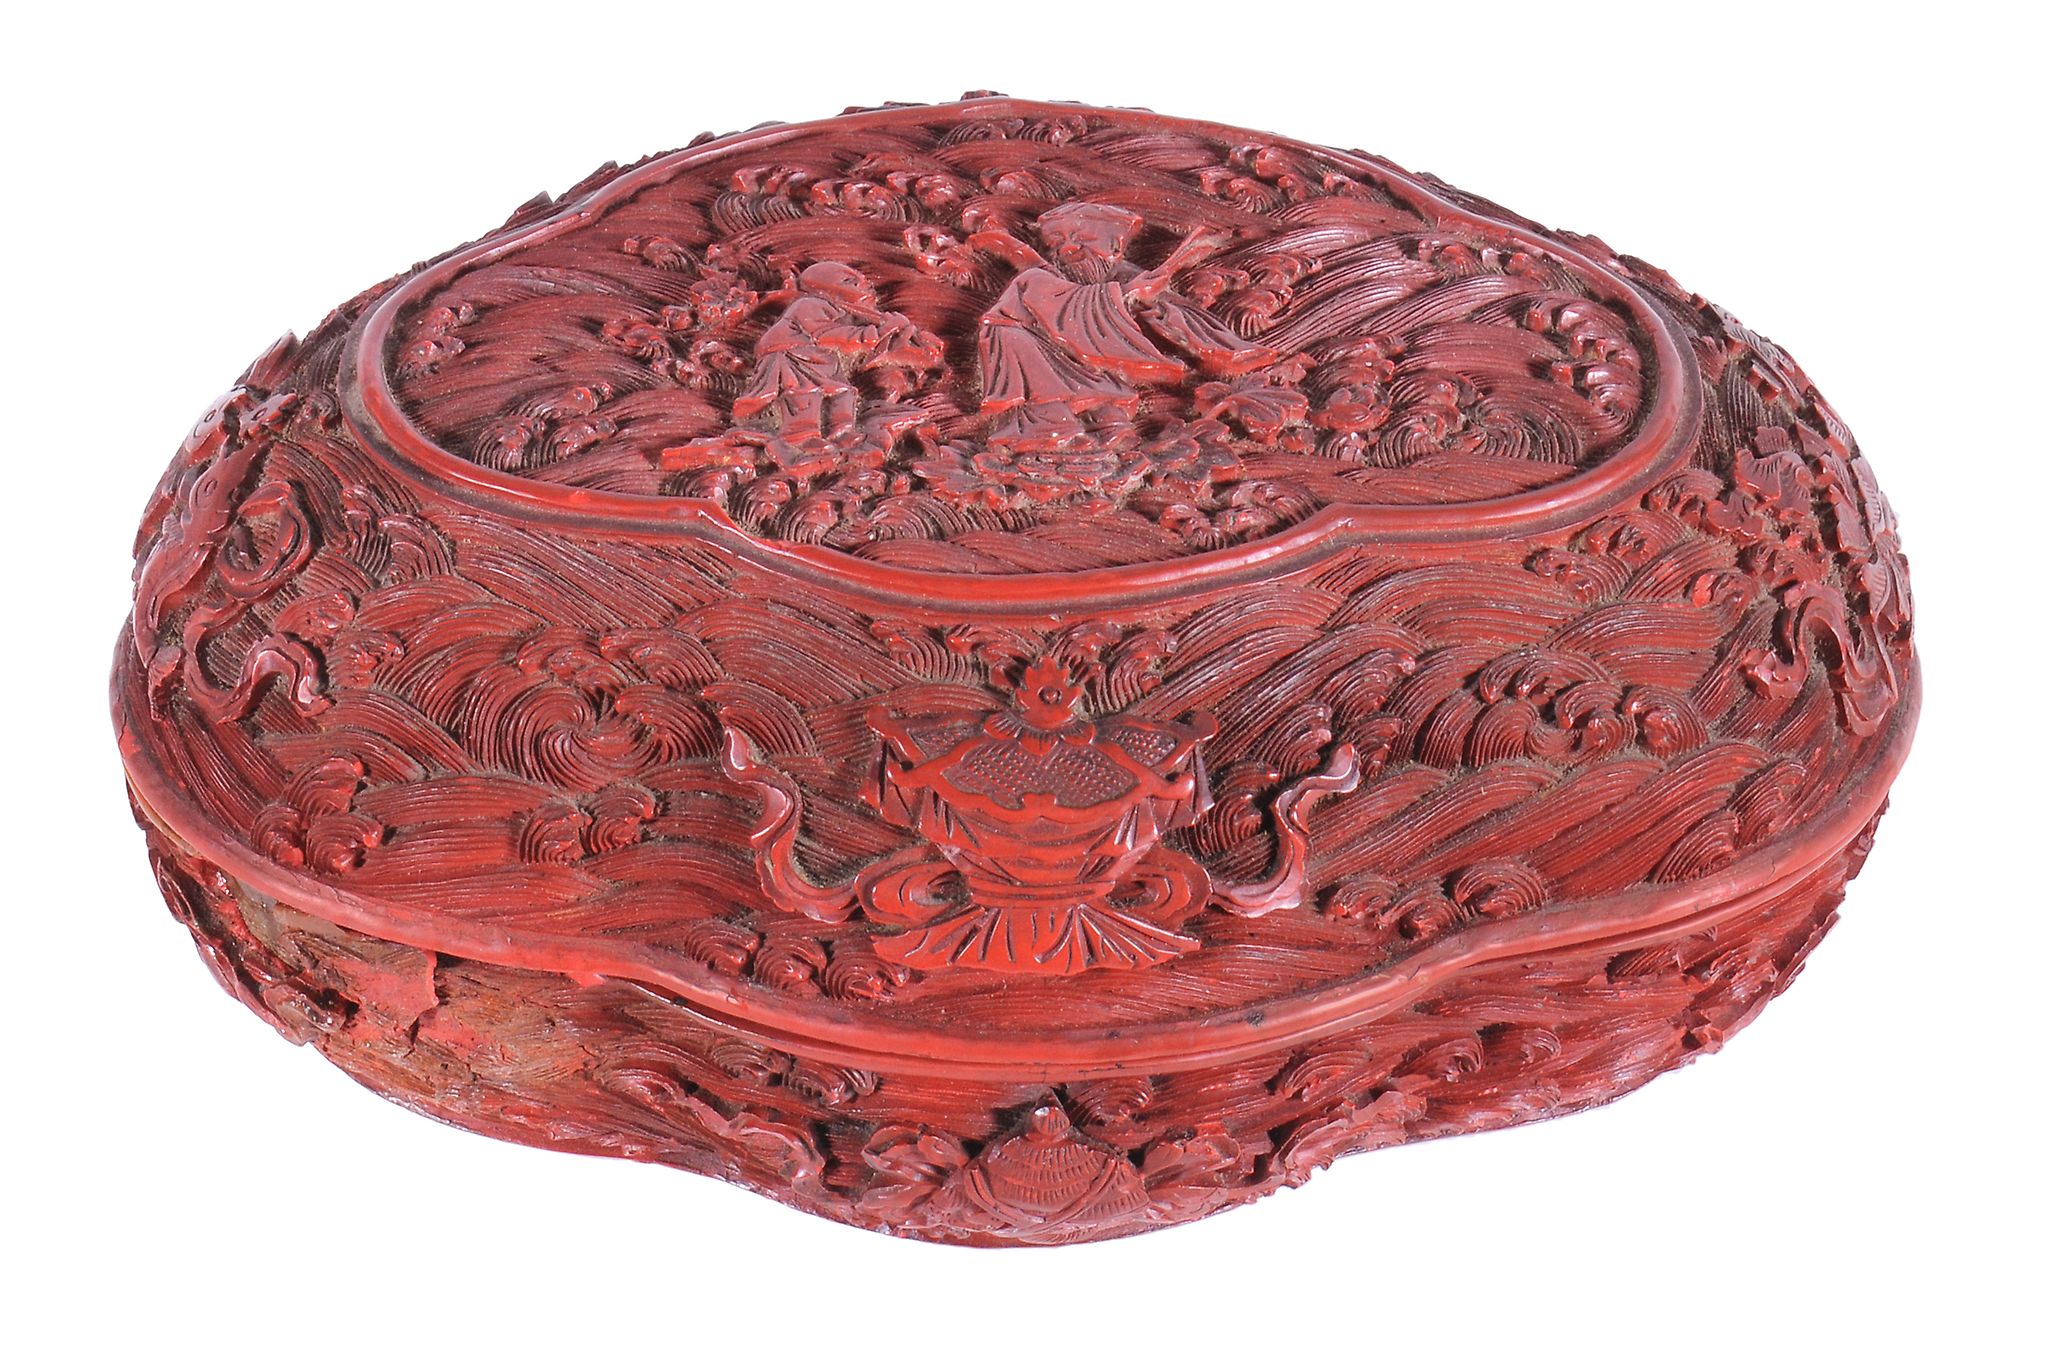 A Chinese cinnabar lacquer box and cover of ruyi head form, Qing Dynasty, 19th century,  carved with